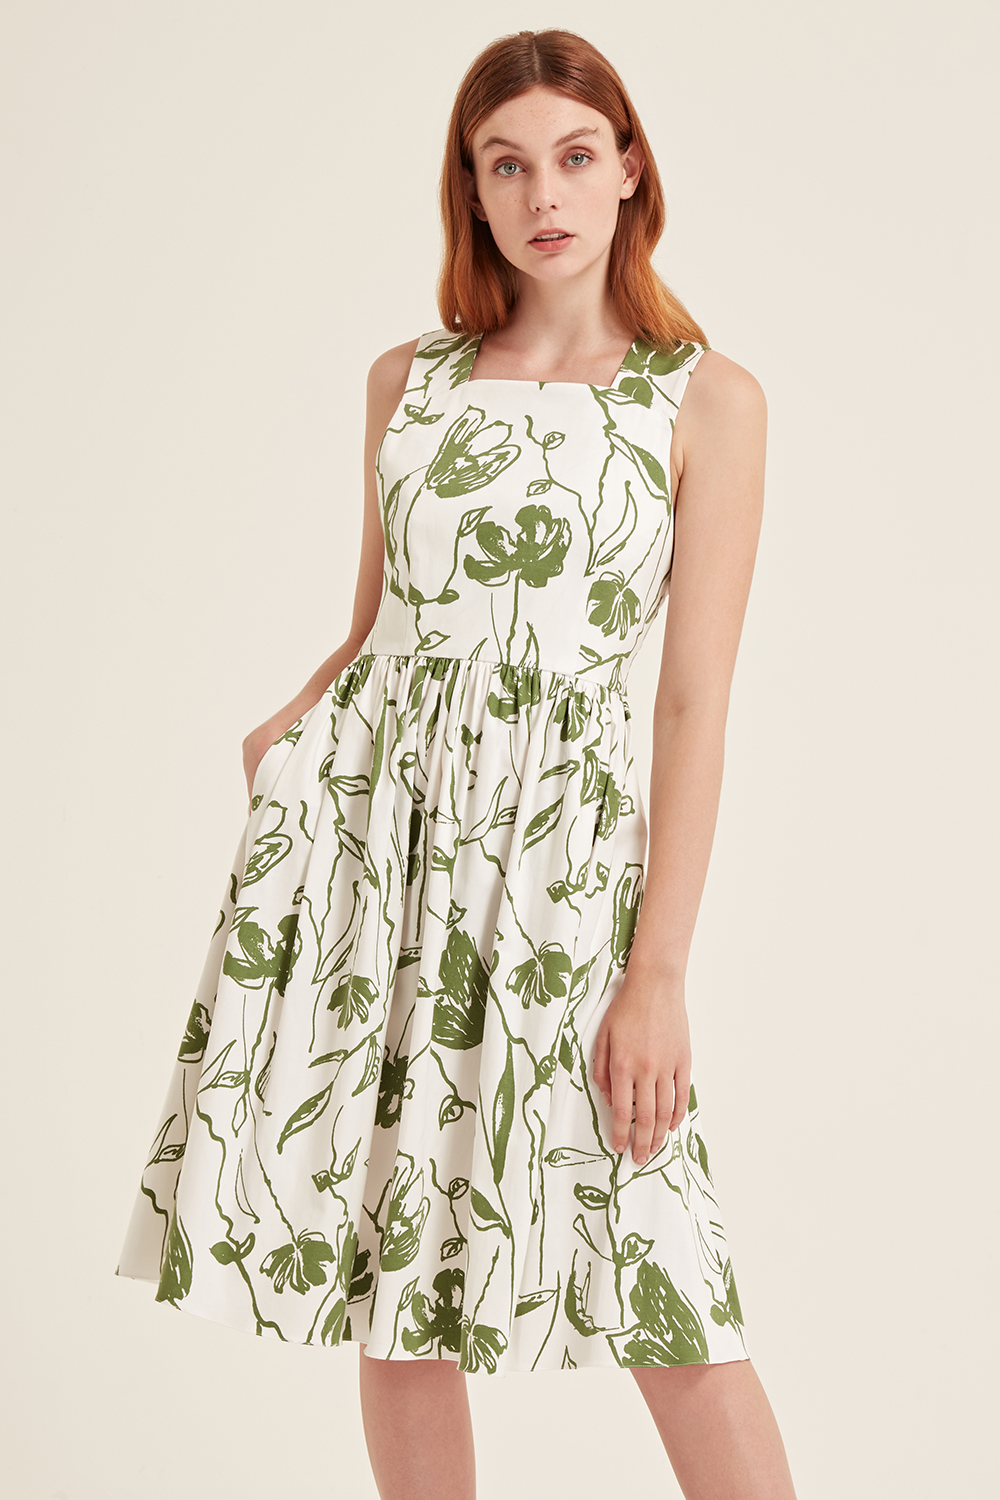 Green Dress White Flowers Top Sellers ...